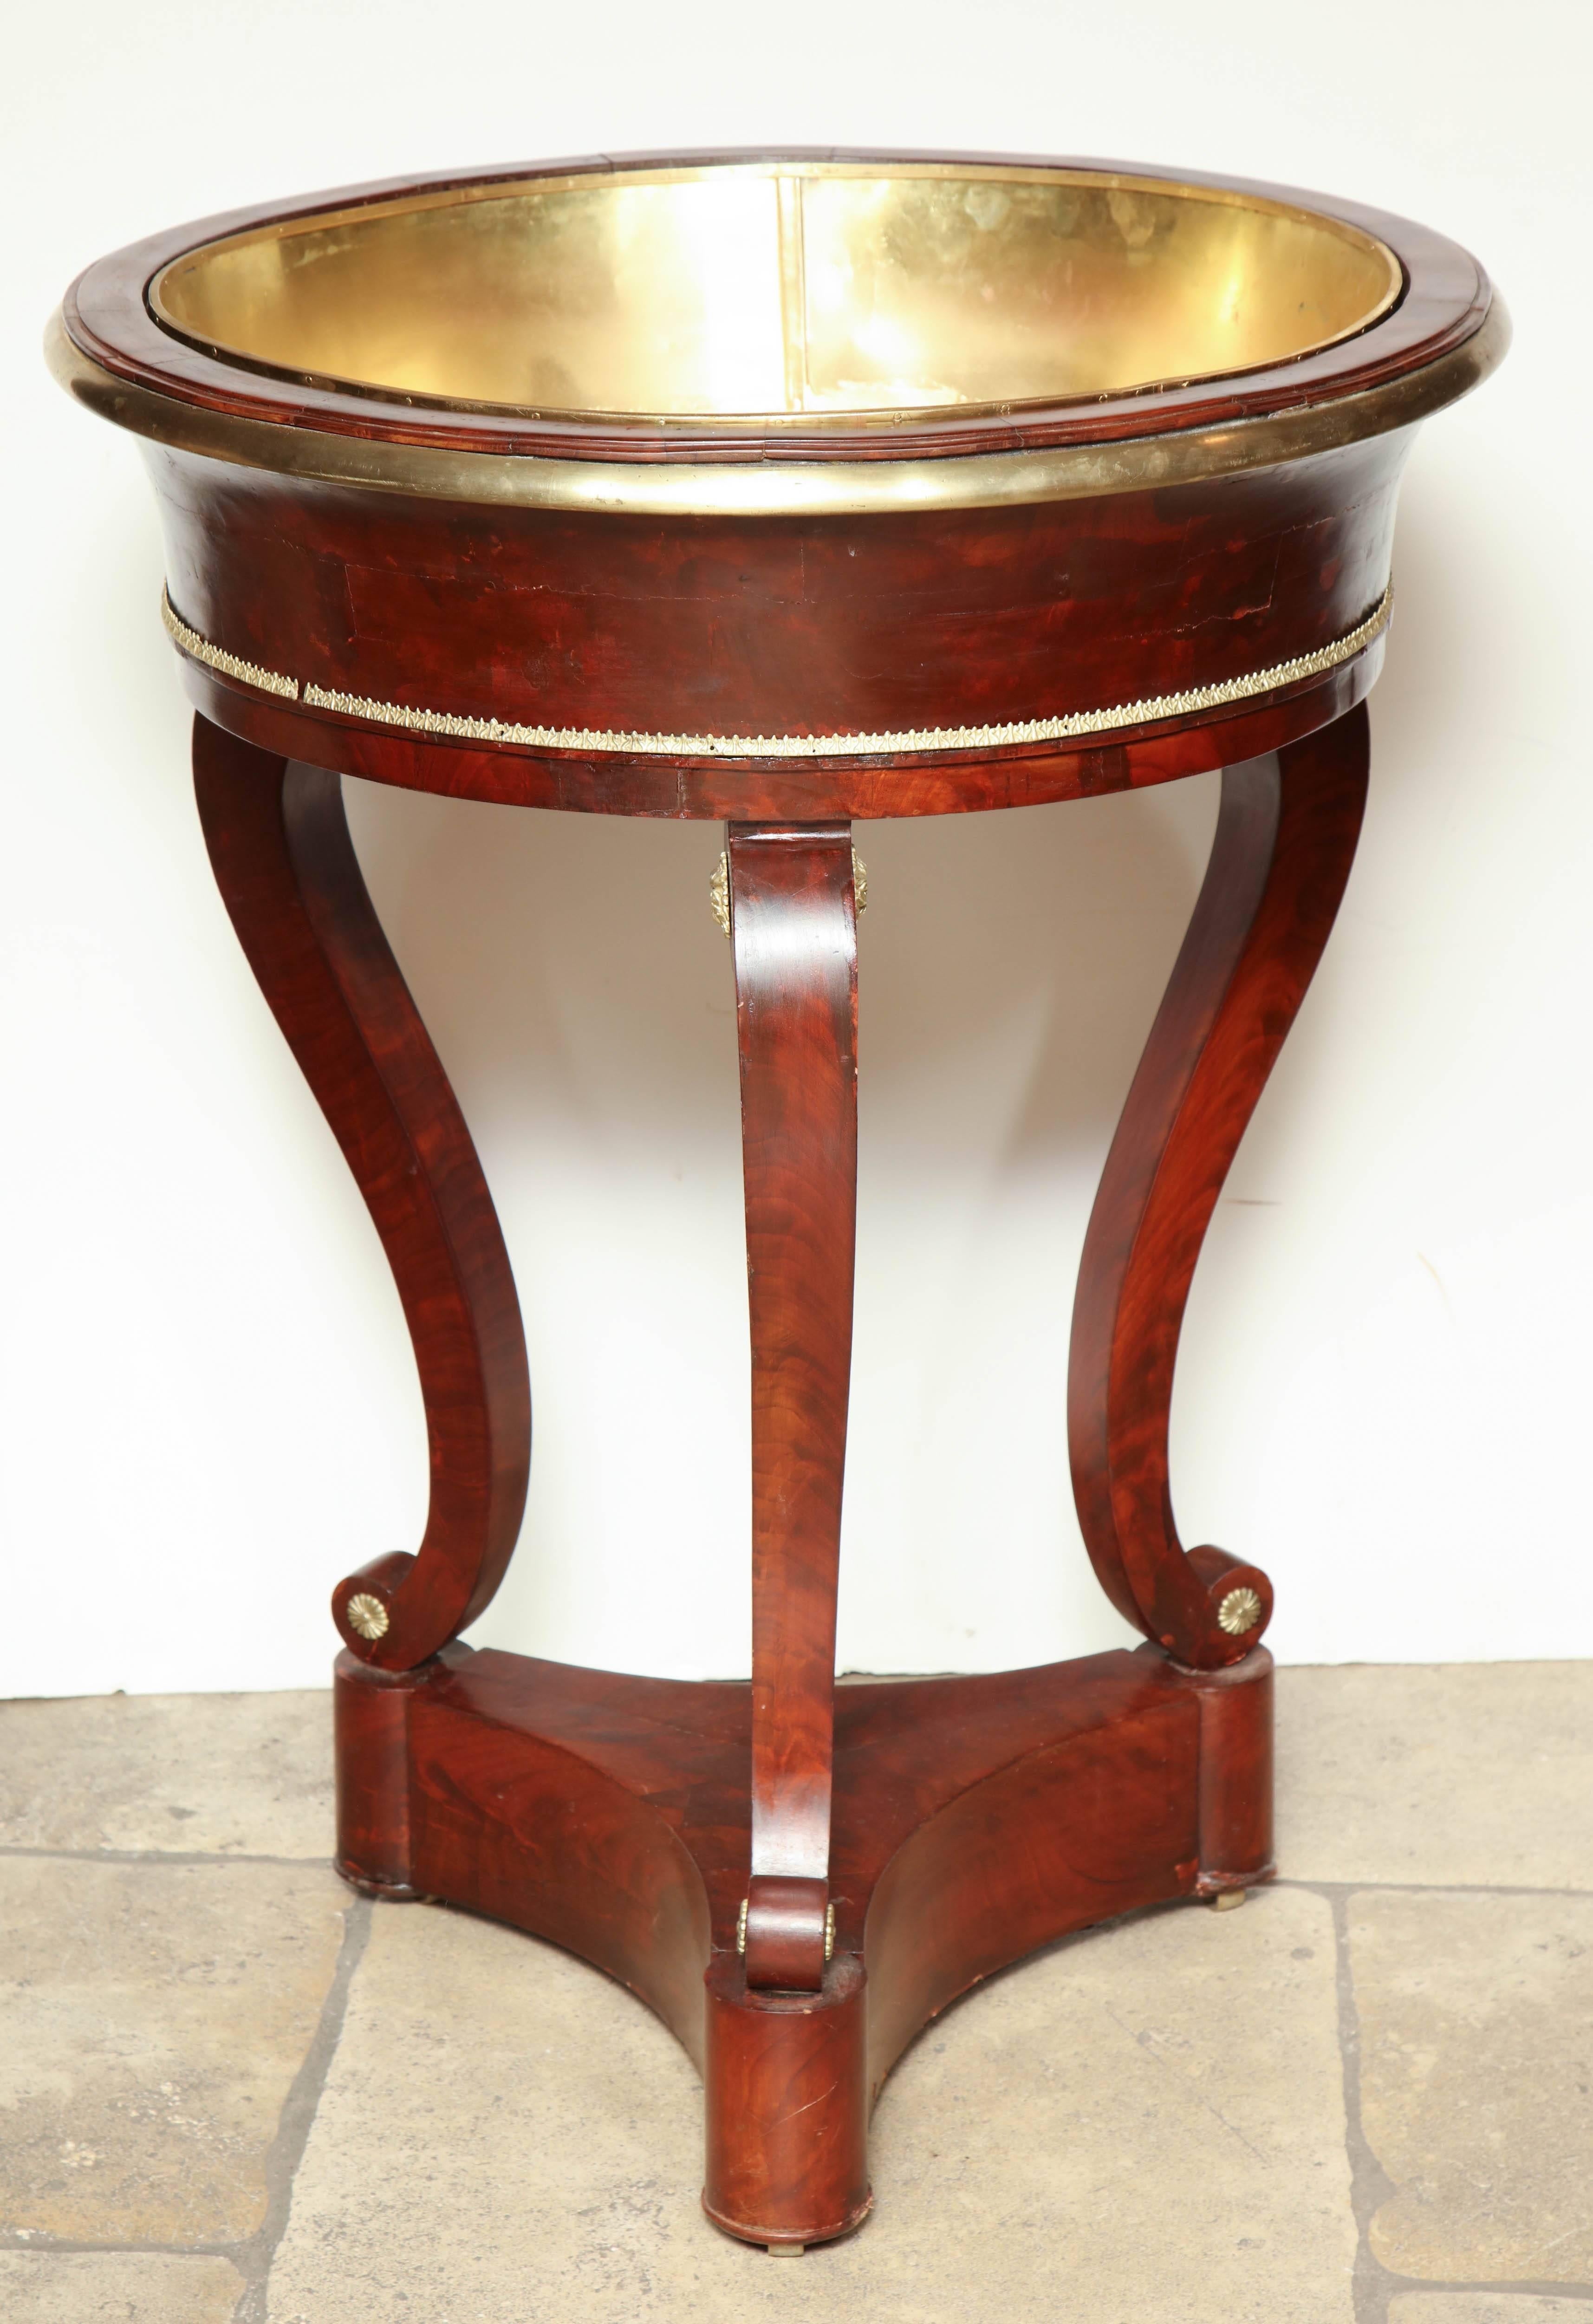 A large French Empire mahogany Jardinière with brass lining, brass trim and mounts on a tripartite plinth base.